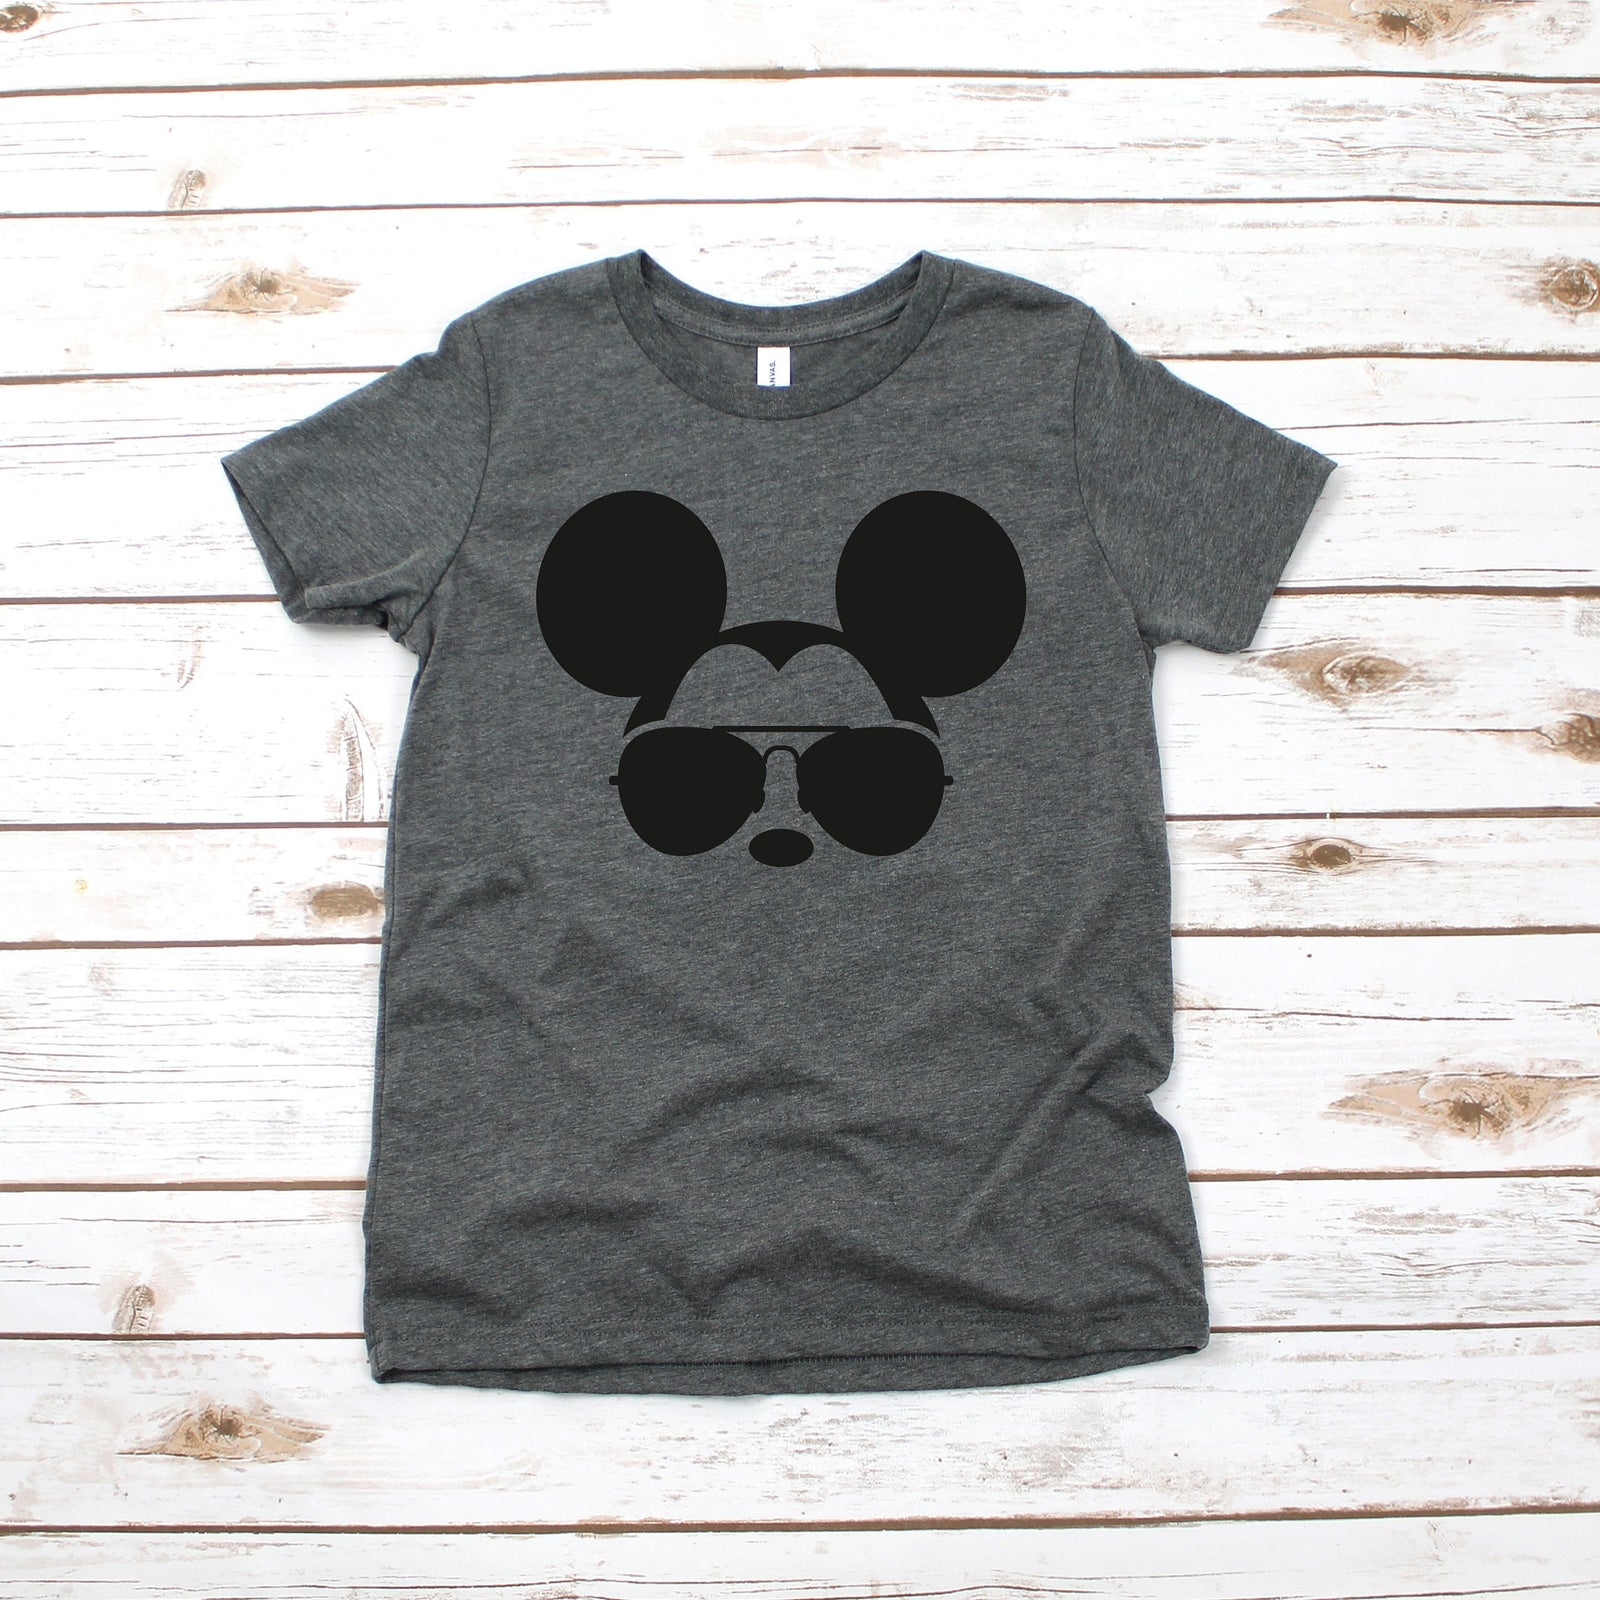 Mickey Mouse Kids T Shirt - Infant Toddler Youth Mickey Shirt - Disney Kids Shirts - Cool Mickey Sunglasses T Shirt